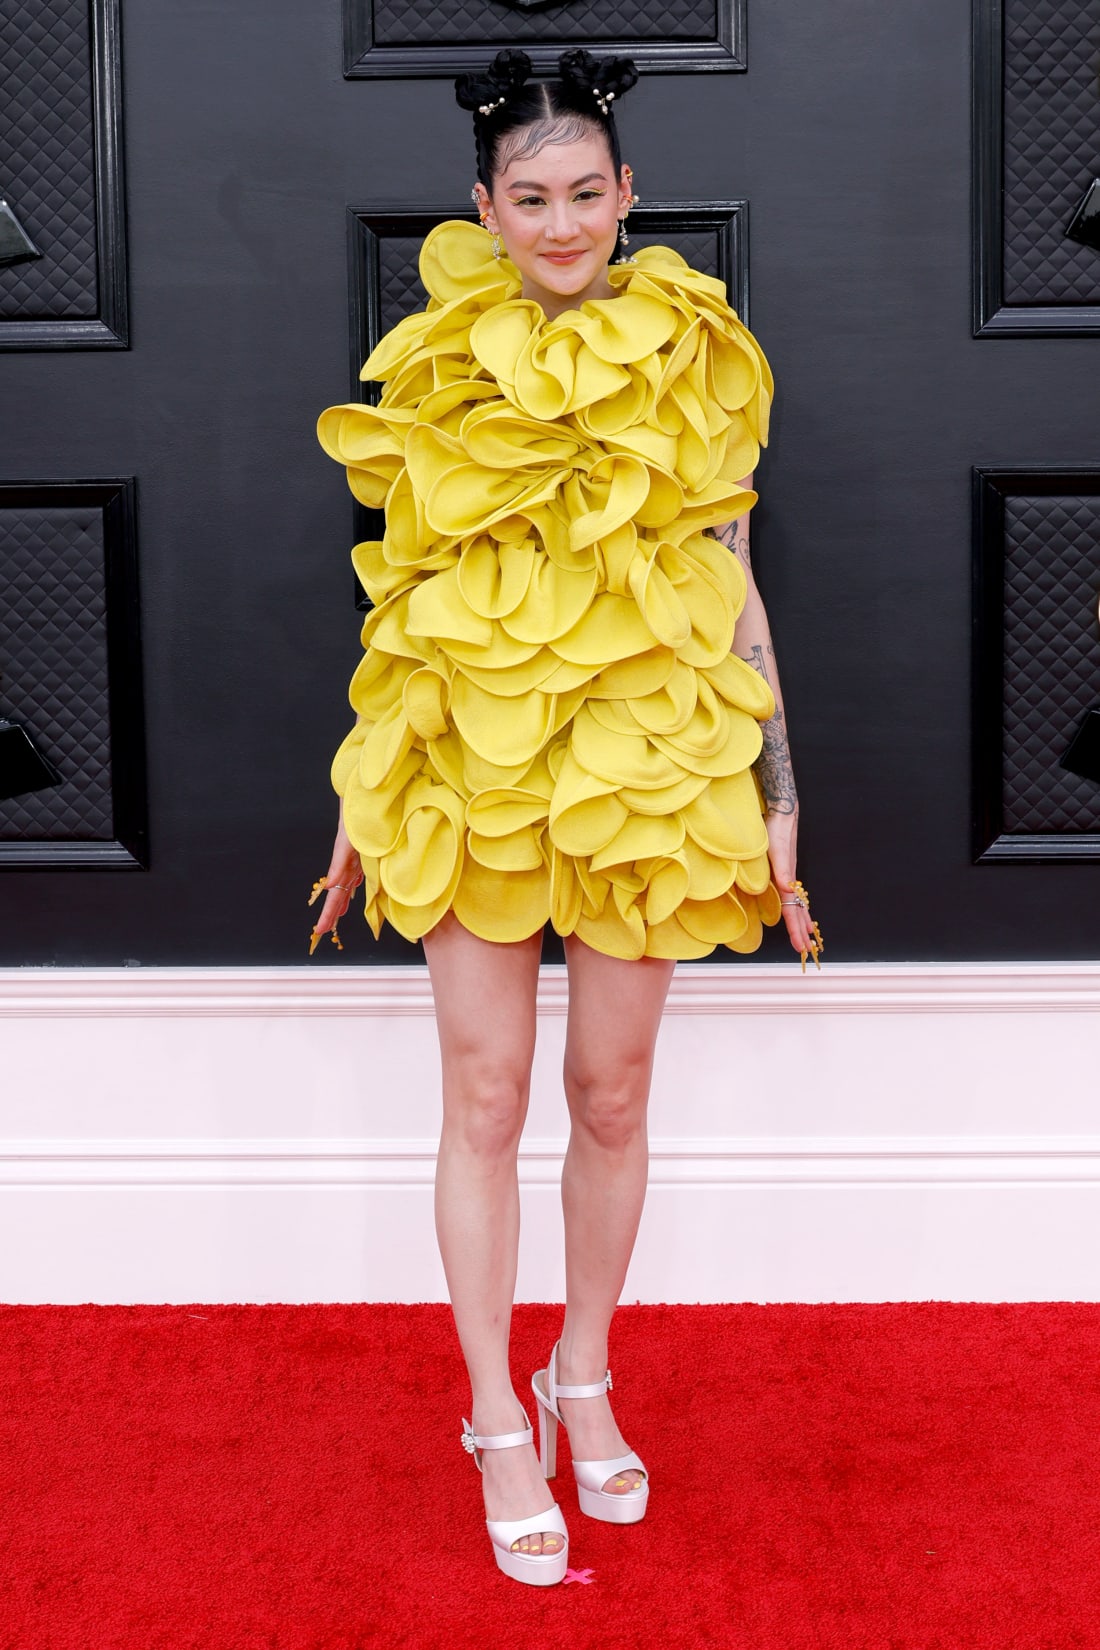 Michelle Zauner of Japanese Breakfast wore a bright yellow Valentino dress, completing the look with elaborate nail art.